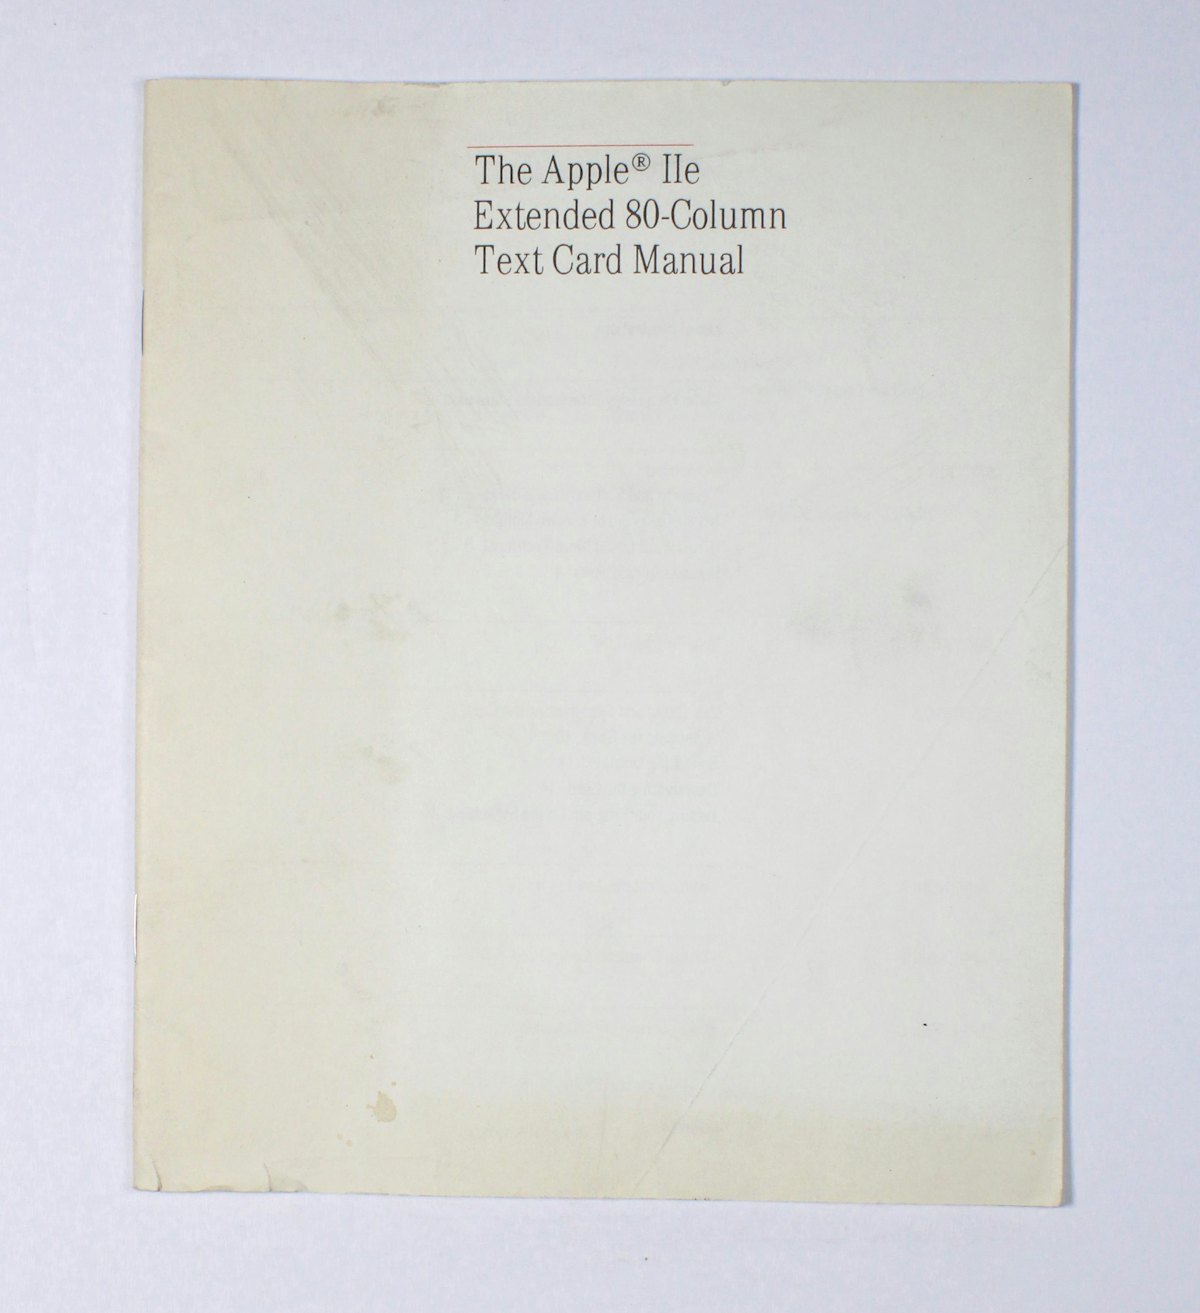 The Apple IIe Extended 80-Column Text Card Manual